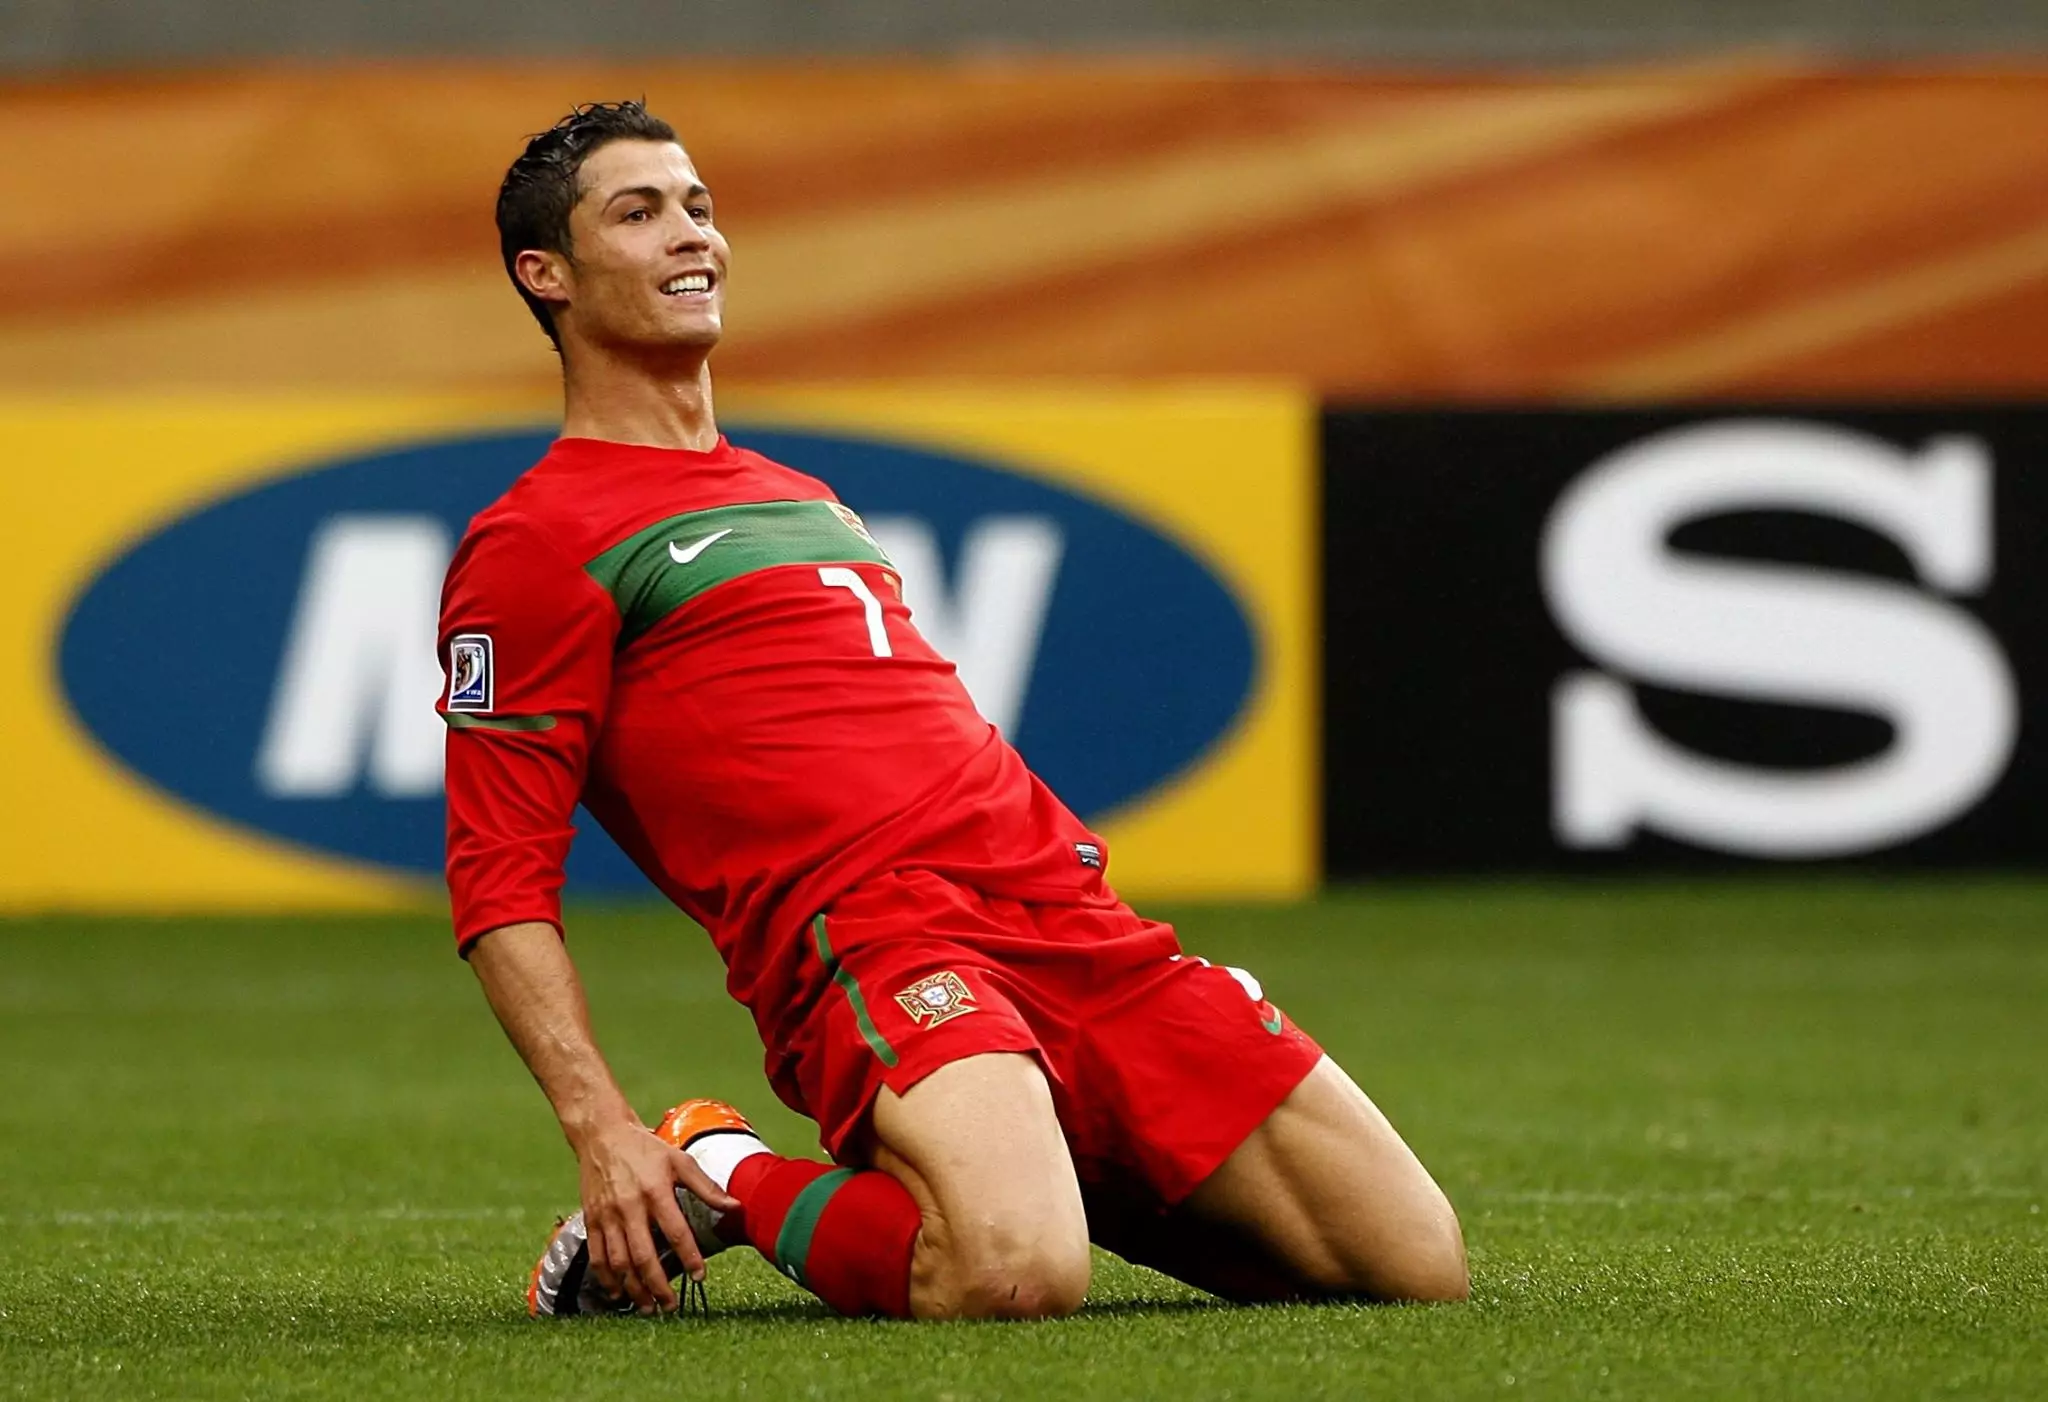 Ronaldo celebrates his goal at the 2010 World Cup. Image: PA Images